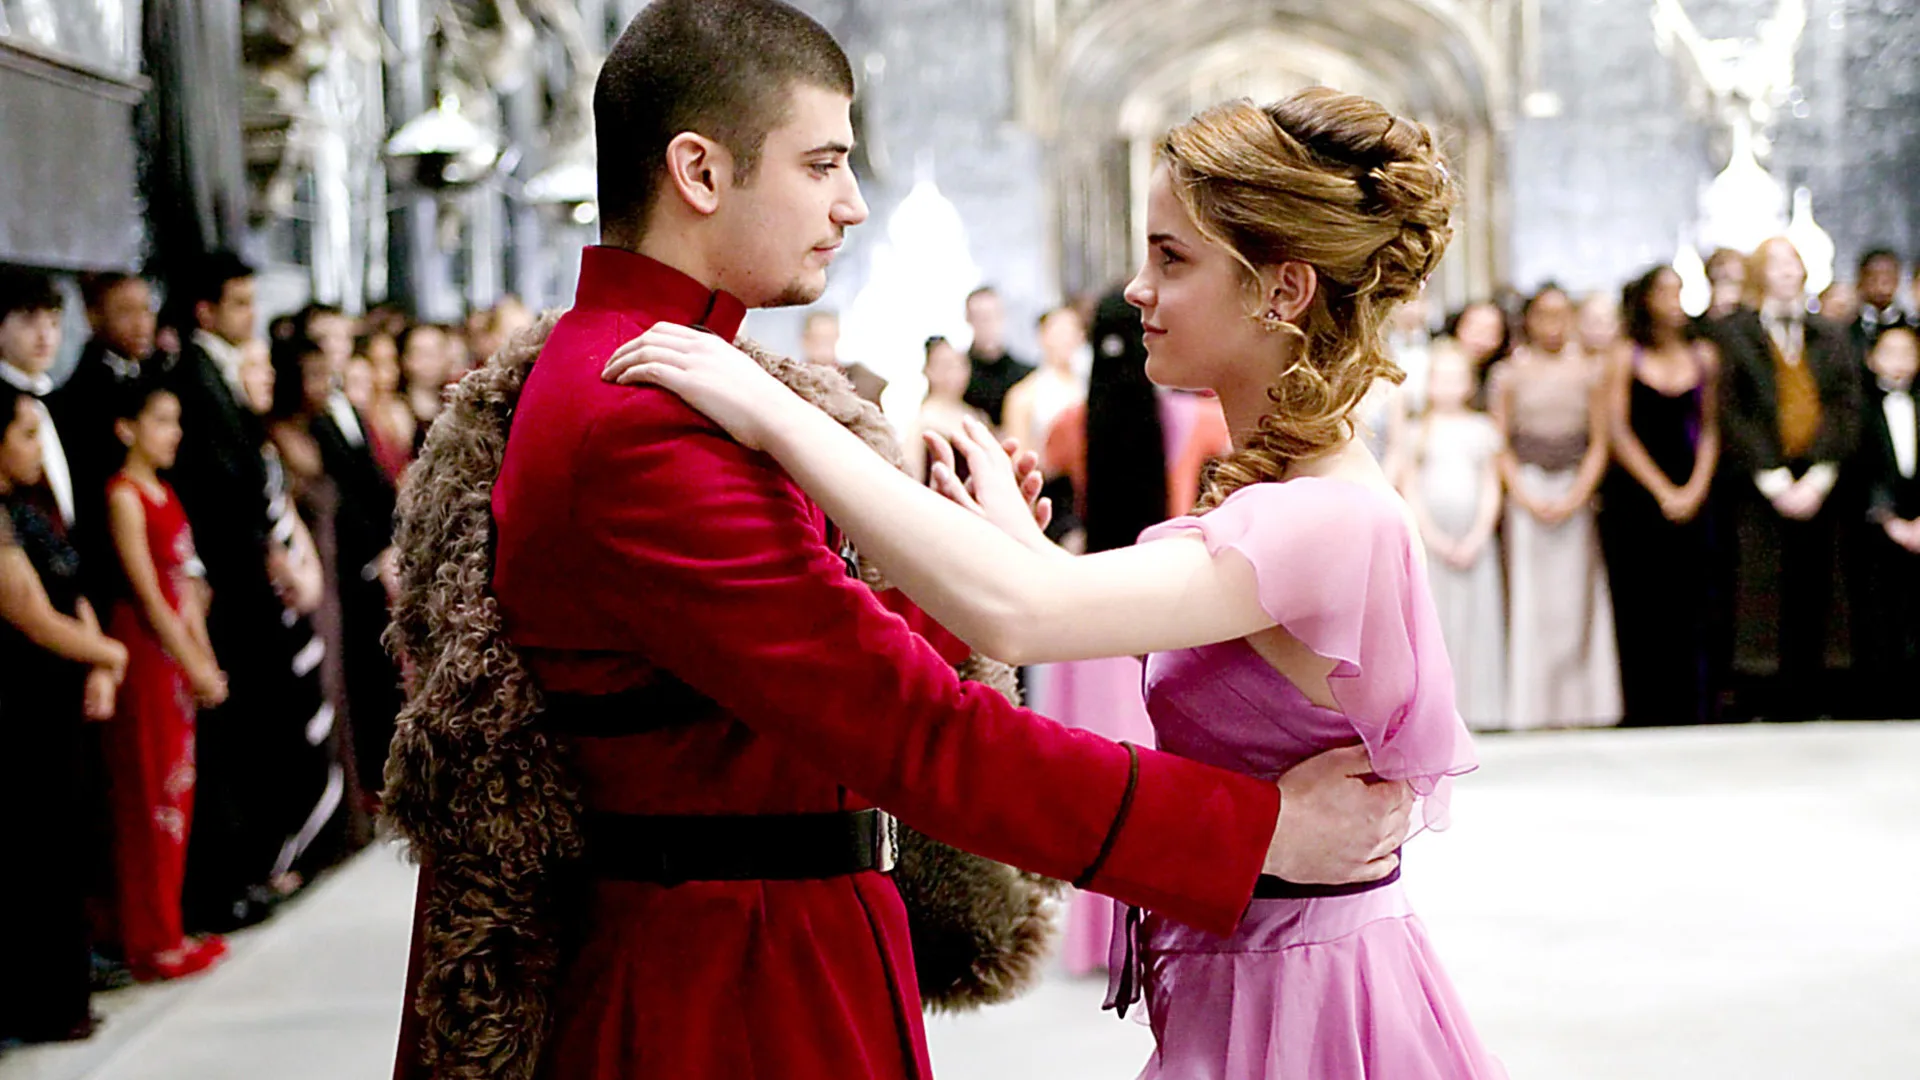 A still from Harry Potter and the Goblet of Fire showing Hermoine and her date dancing - she is wearing a pink dress and he a red suit